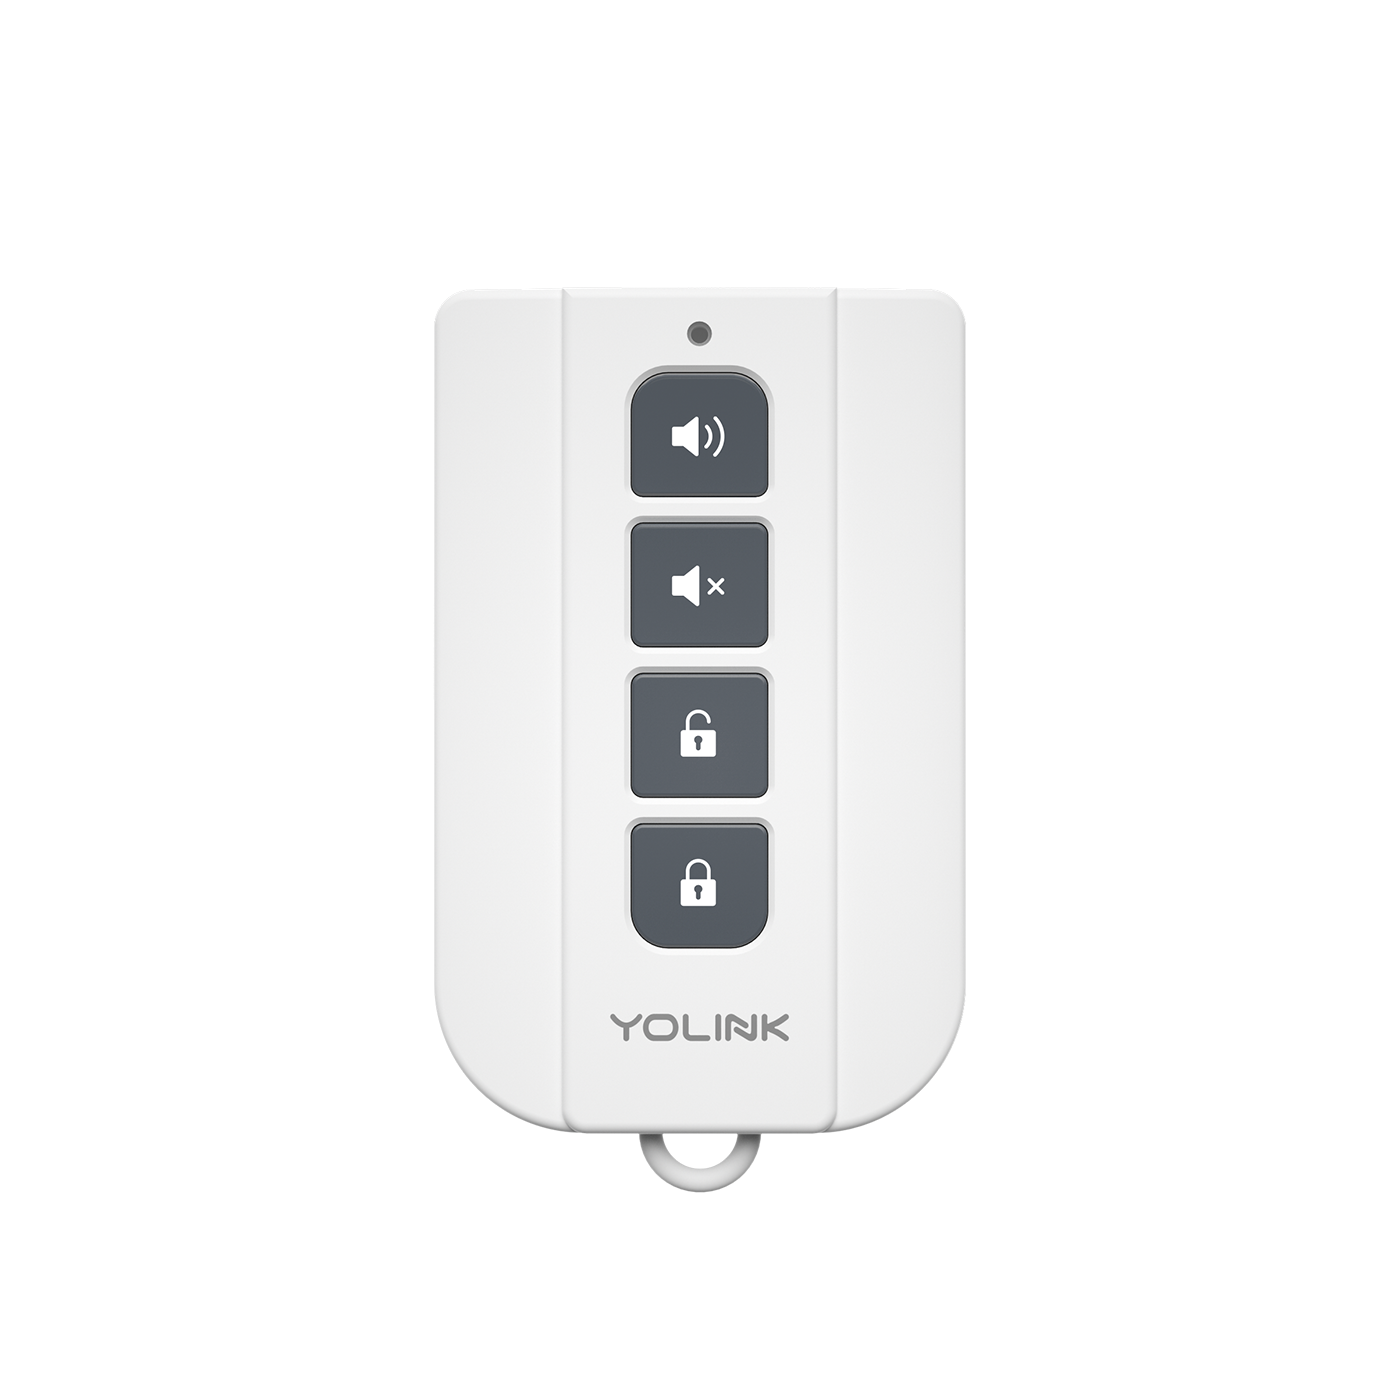 SirenFob, Smart Fob for use with YoLink Siren Products